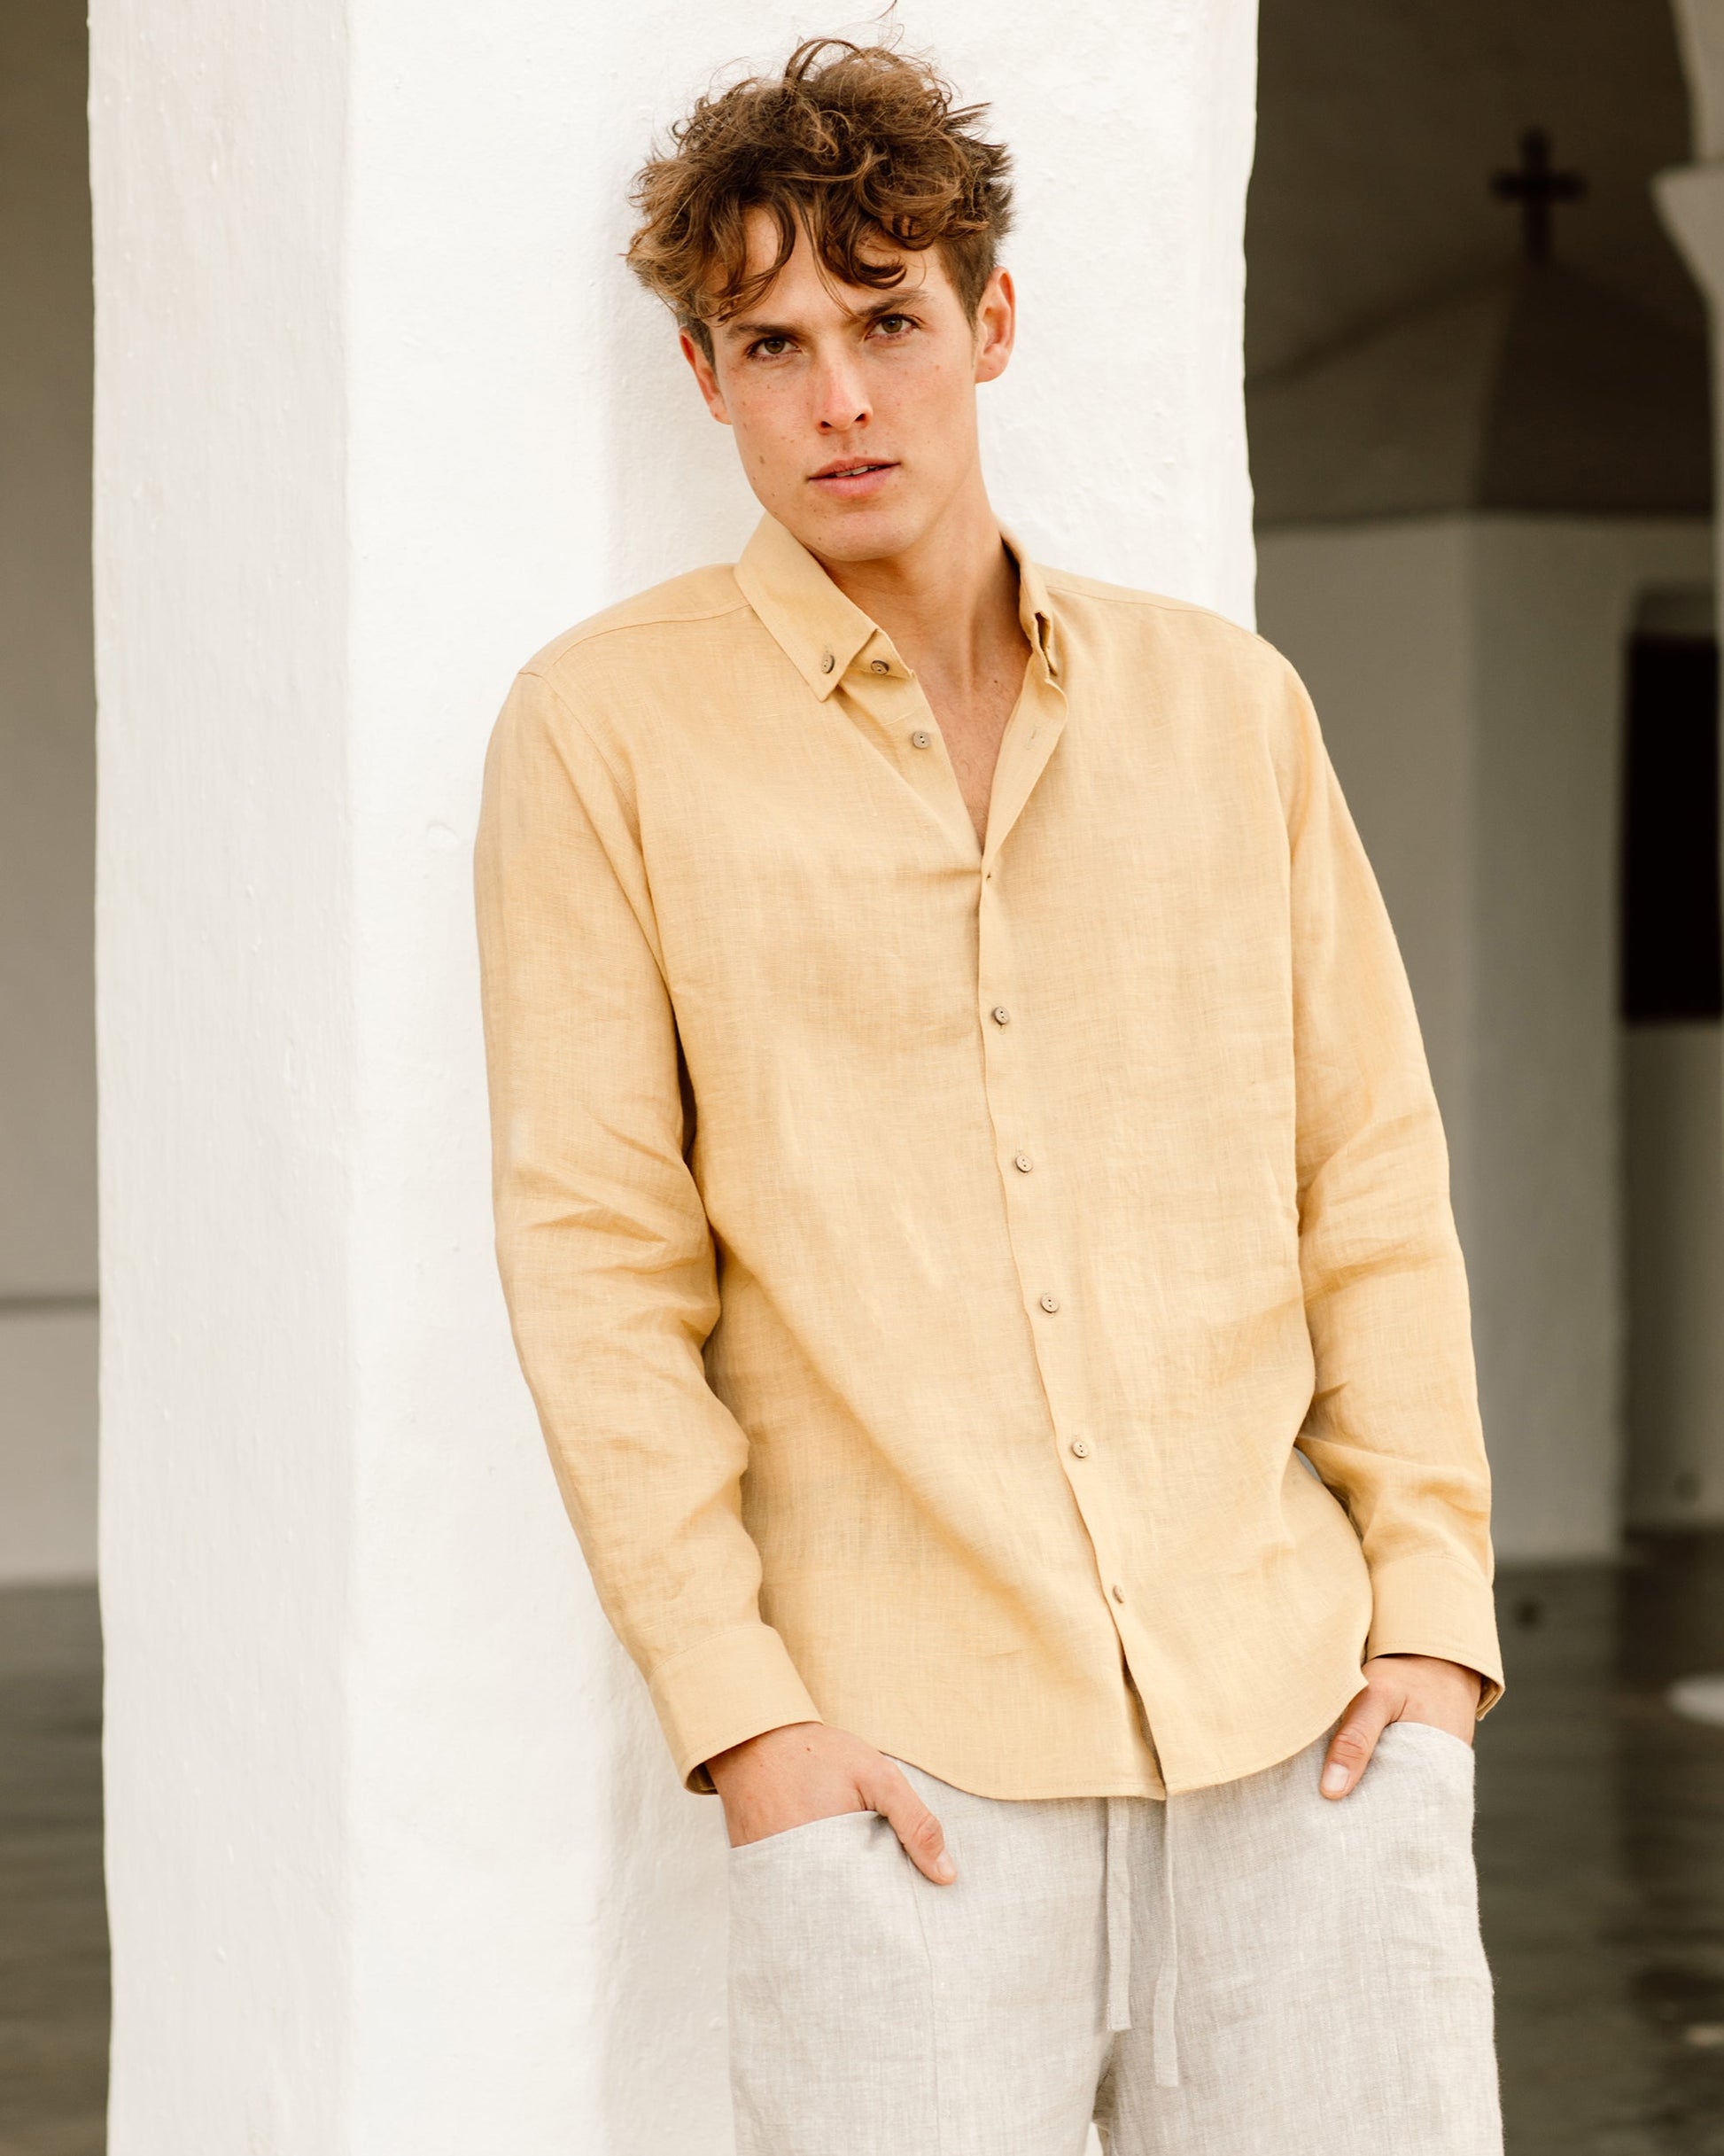 LINEN CASUAL SHIRTS AT 50% OFF* - Buy Linen Shirts for Men Online